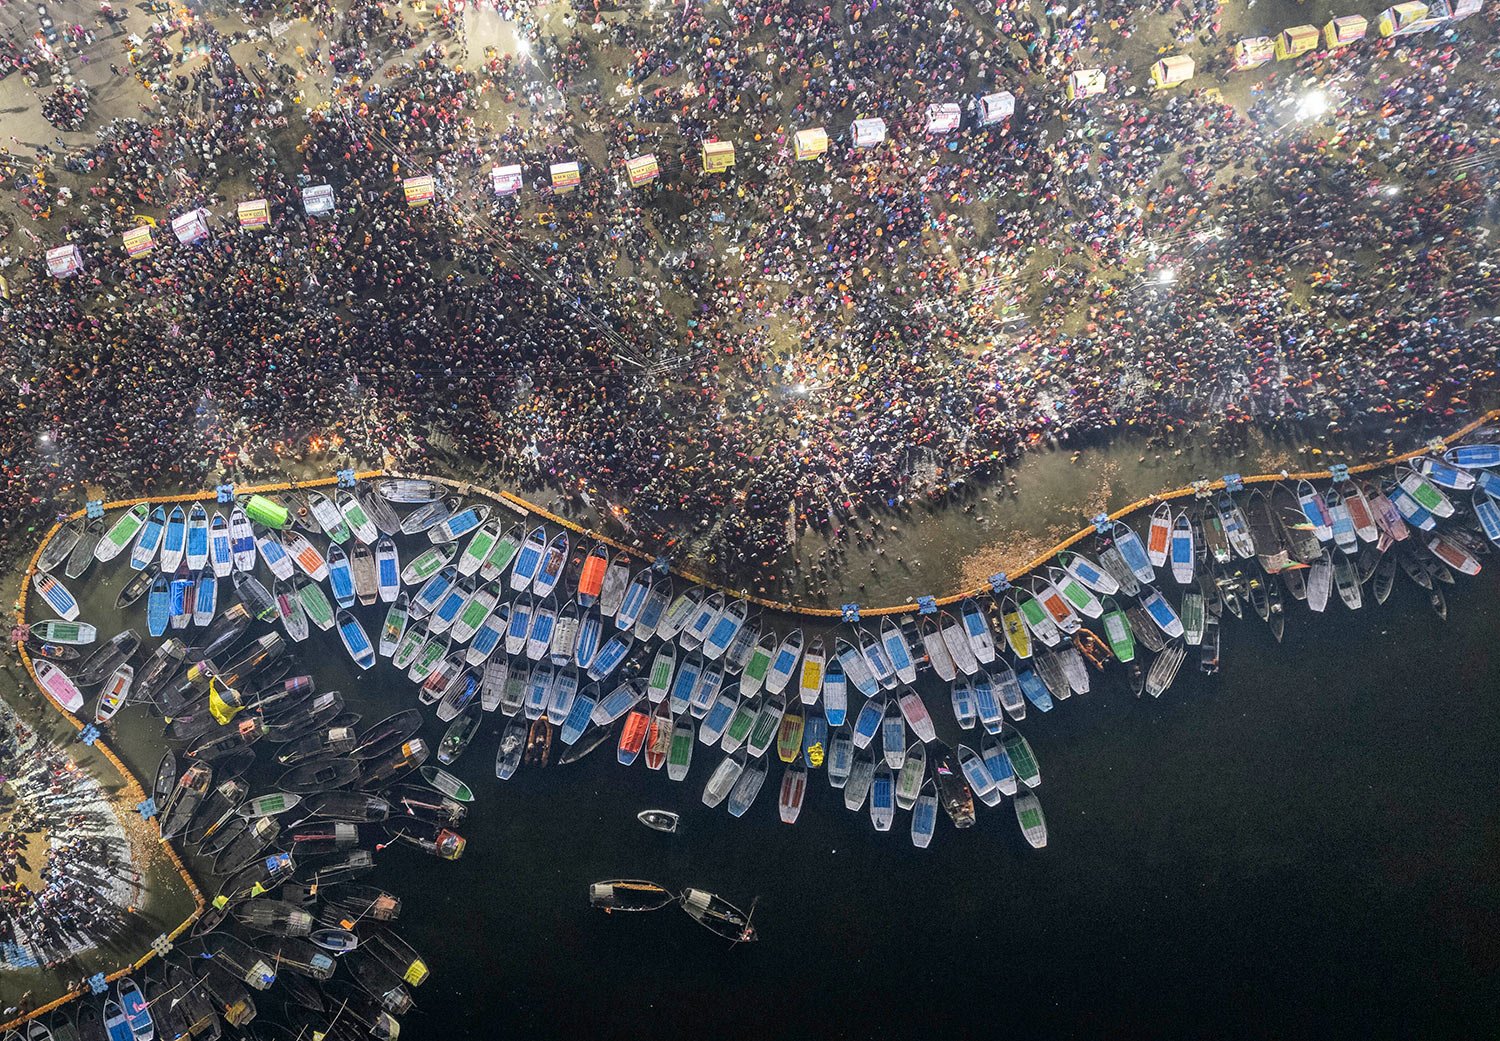  Hindu devotees crowd the Sangam, the confluence of the rivers, the Ganges, Yamuna and the mythical Saraswati, to take a holy dip on Mauni Amavsya or the new moon day, the most auspicious day during the annual month long Hindu religious fair "Magh Me